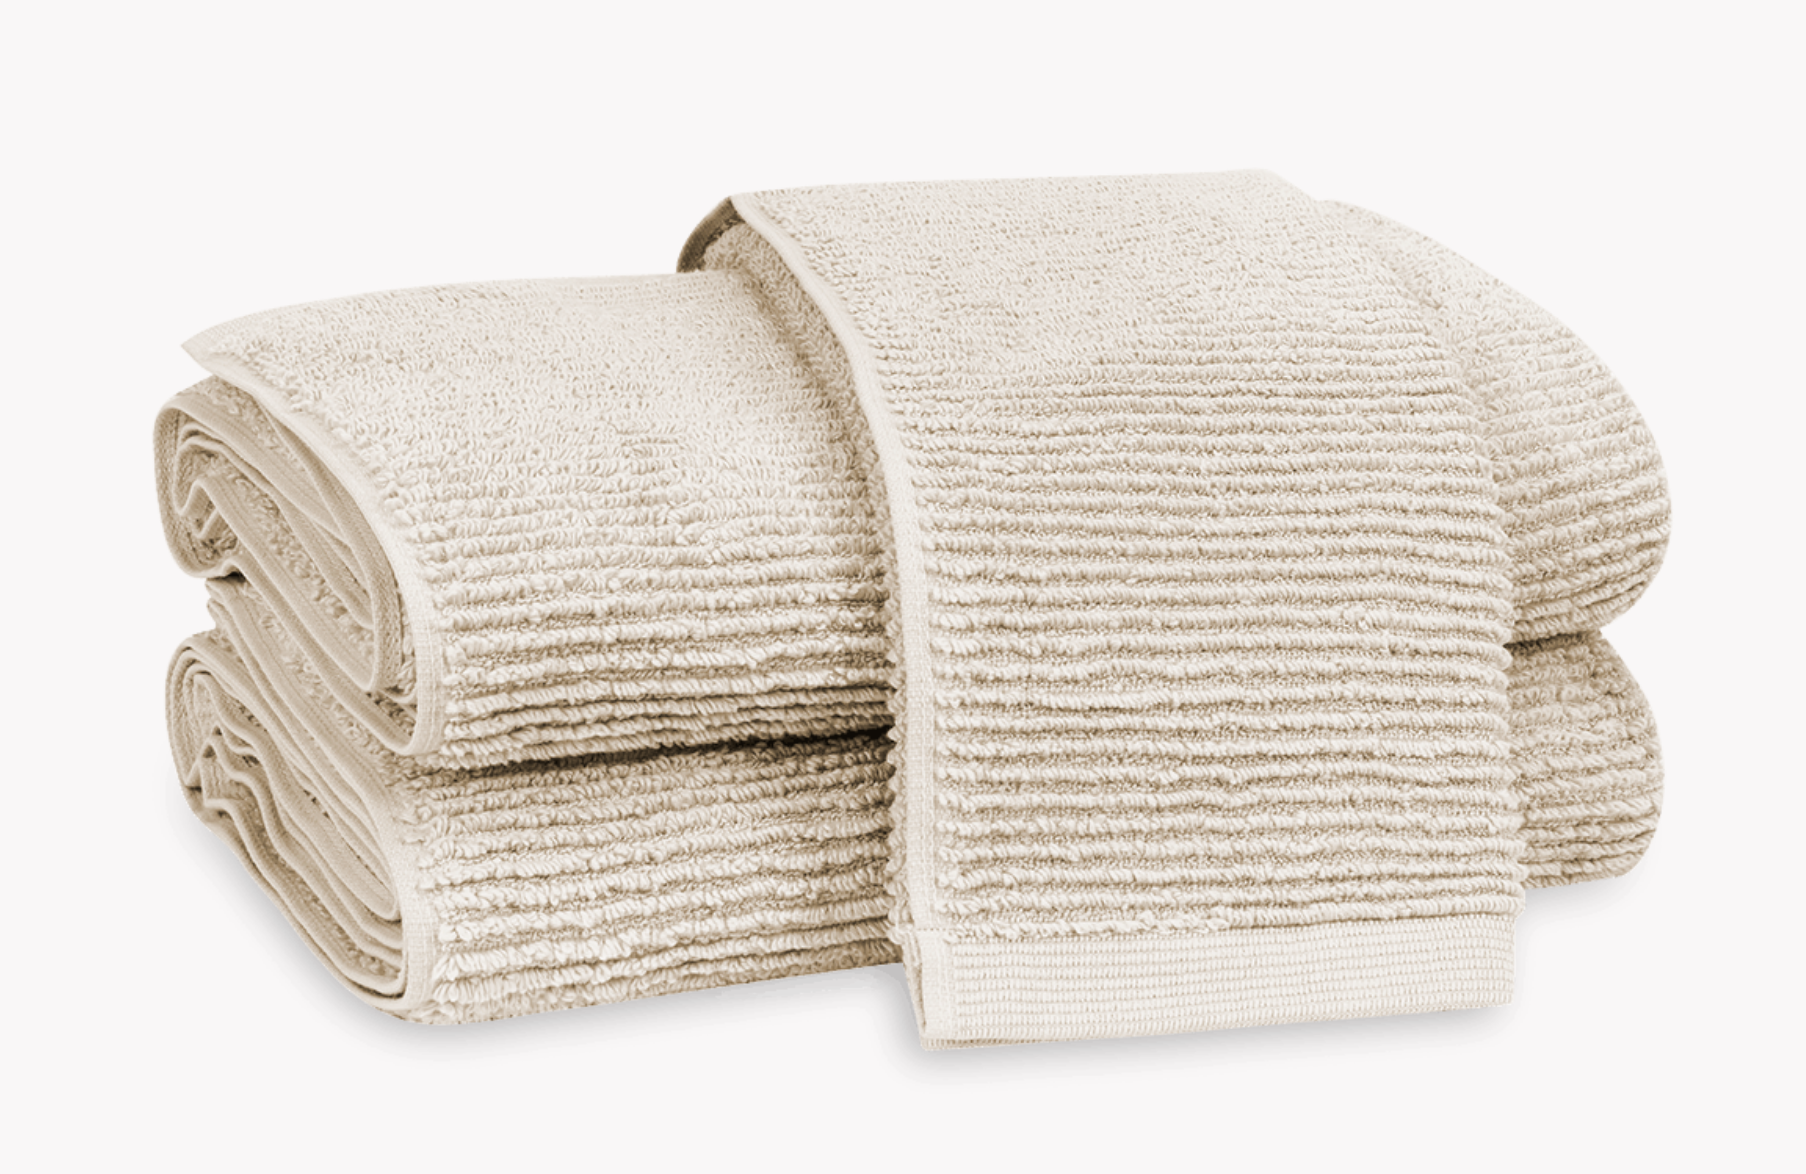 The Aman Towels by Matouk